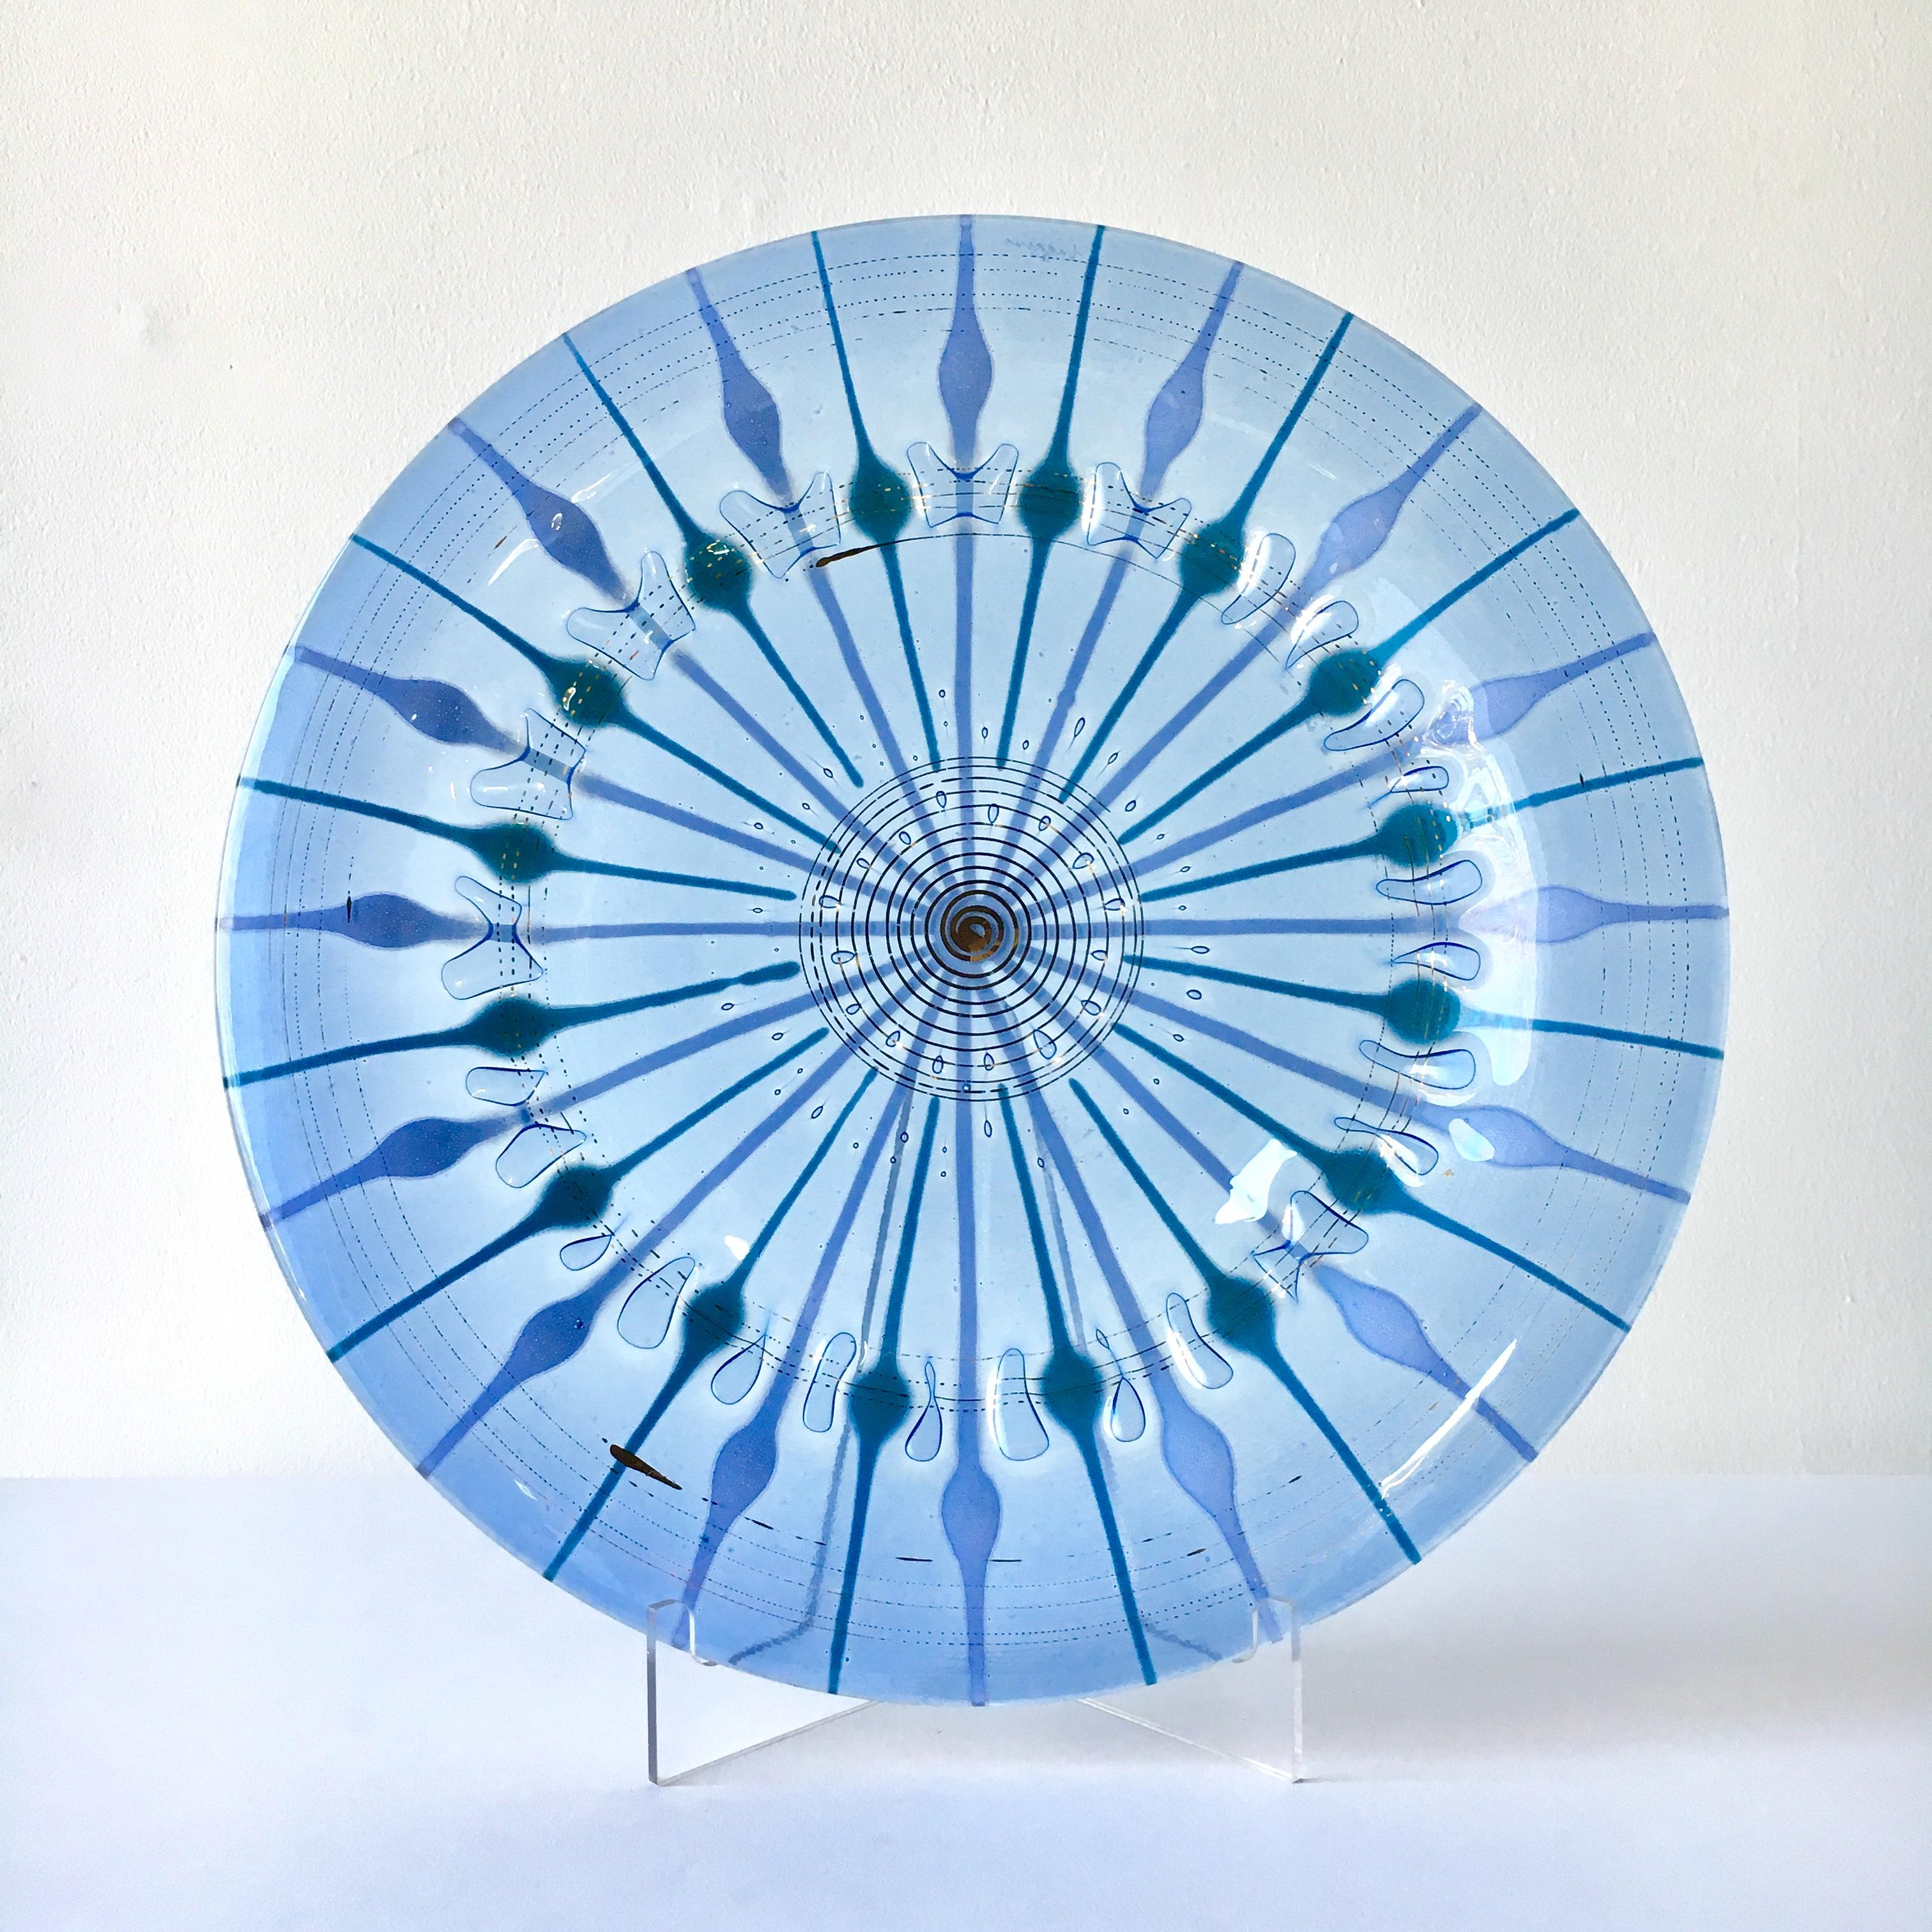 A Classic line circular fused studio glass plate by Michael and Frances Higgins USA etched signature late 1960-early 1970s

Michael Higgins (1908-1999) and Frances Higgins (1912-2004) met in Chicago and were married in 1948. They had a fascination